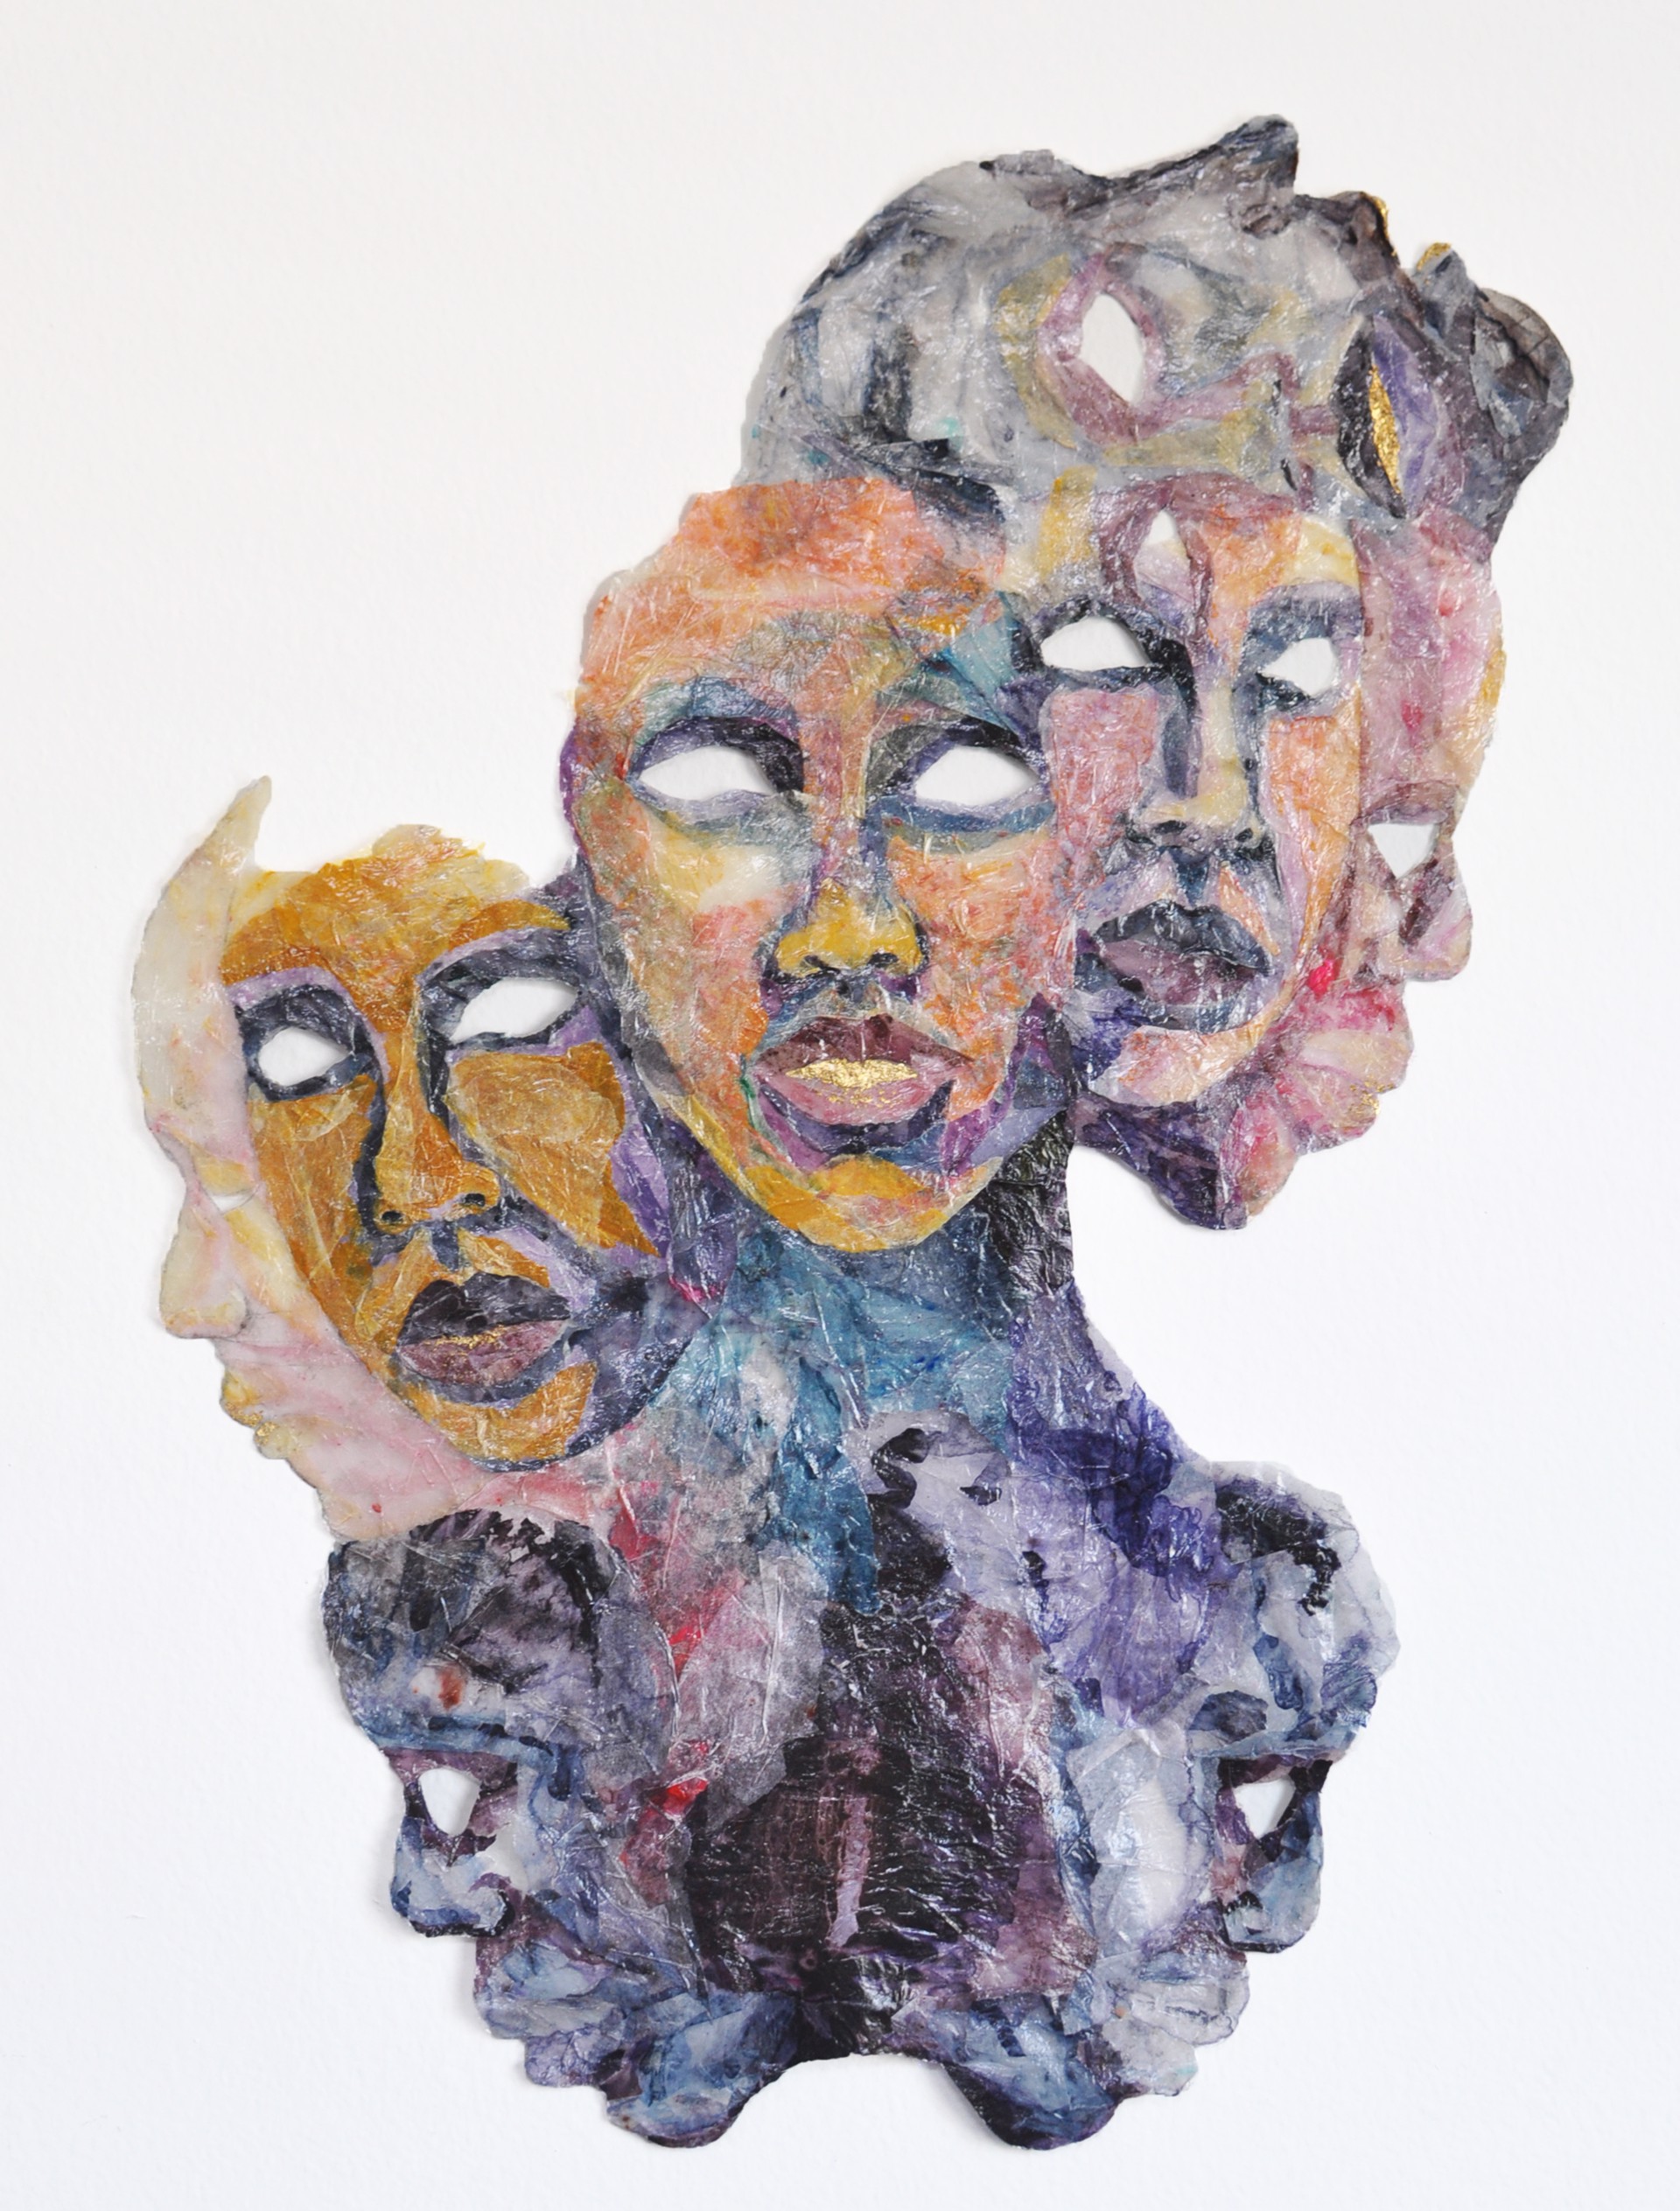 The Masks I Wore by Vanessa Wallace-Gonzales